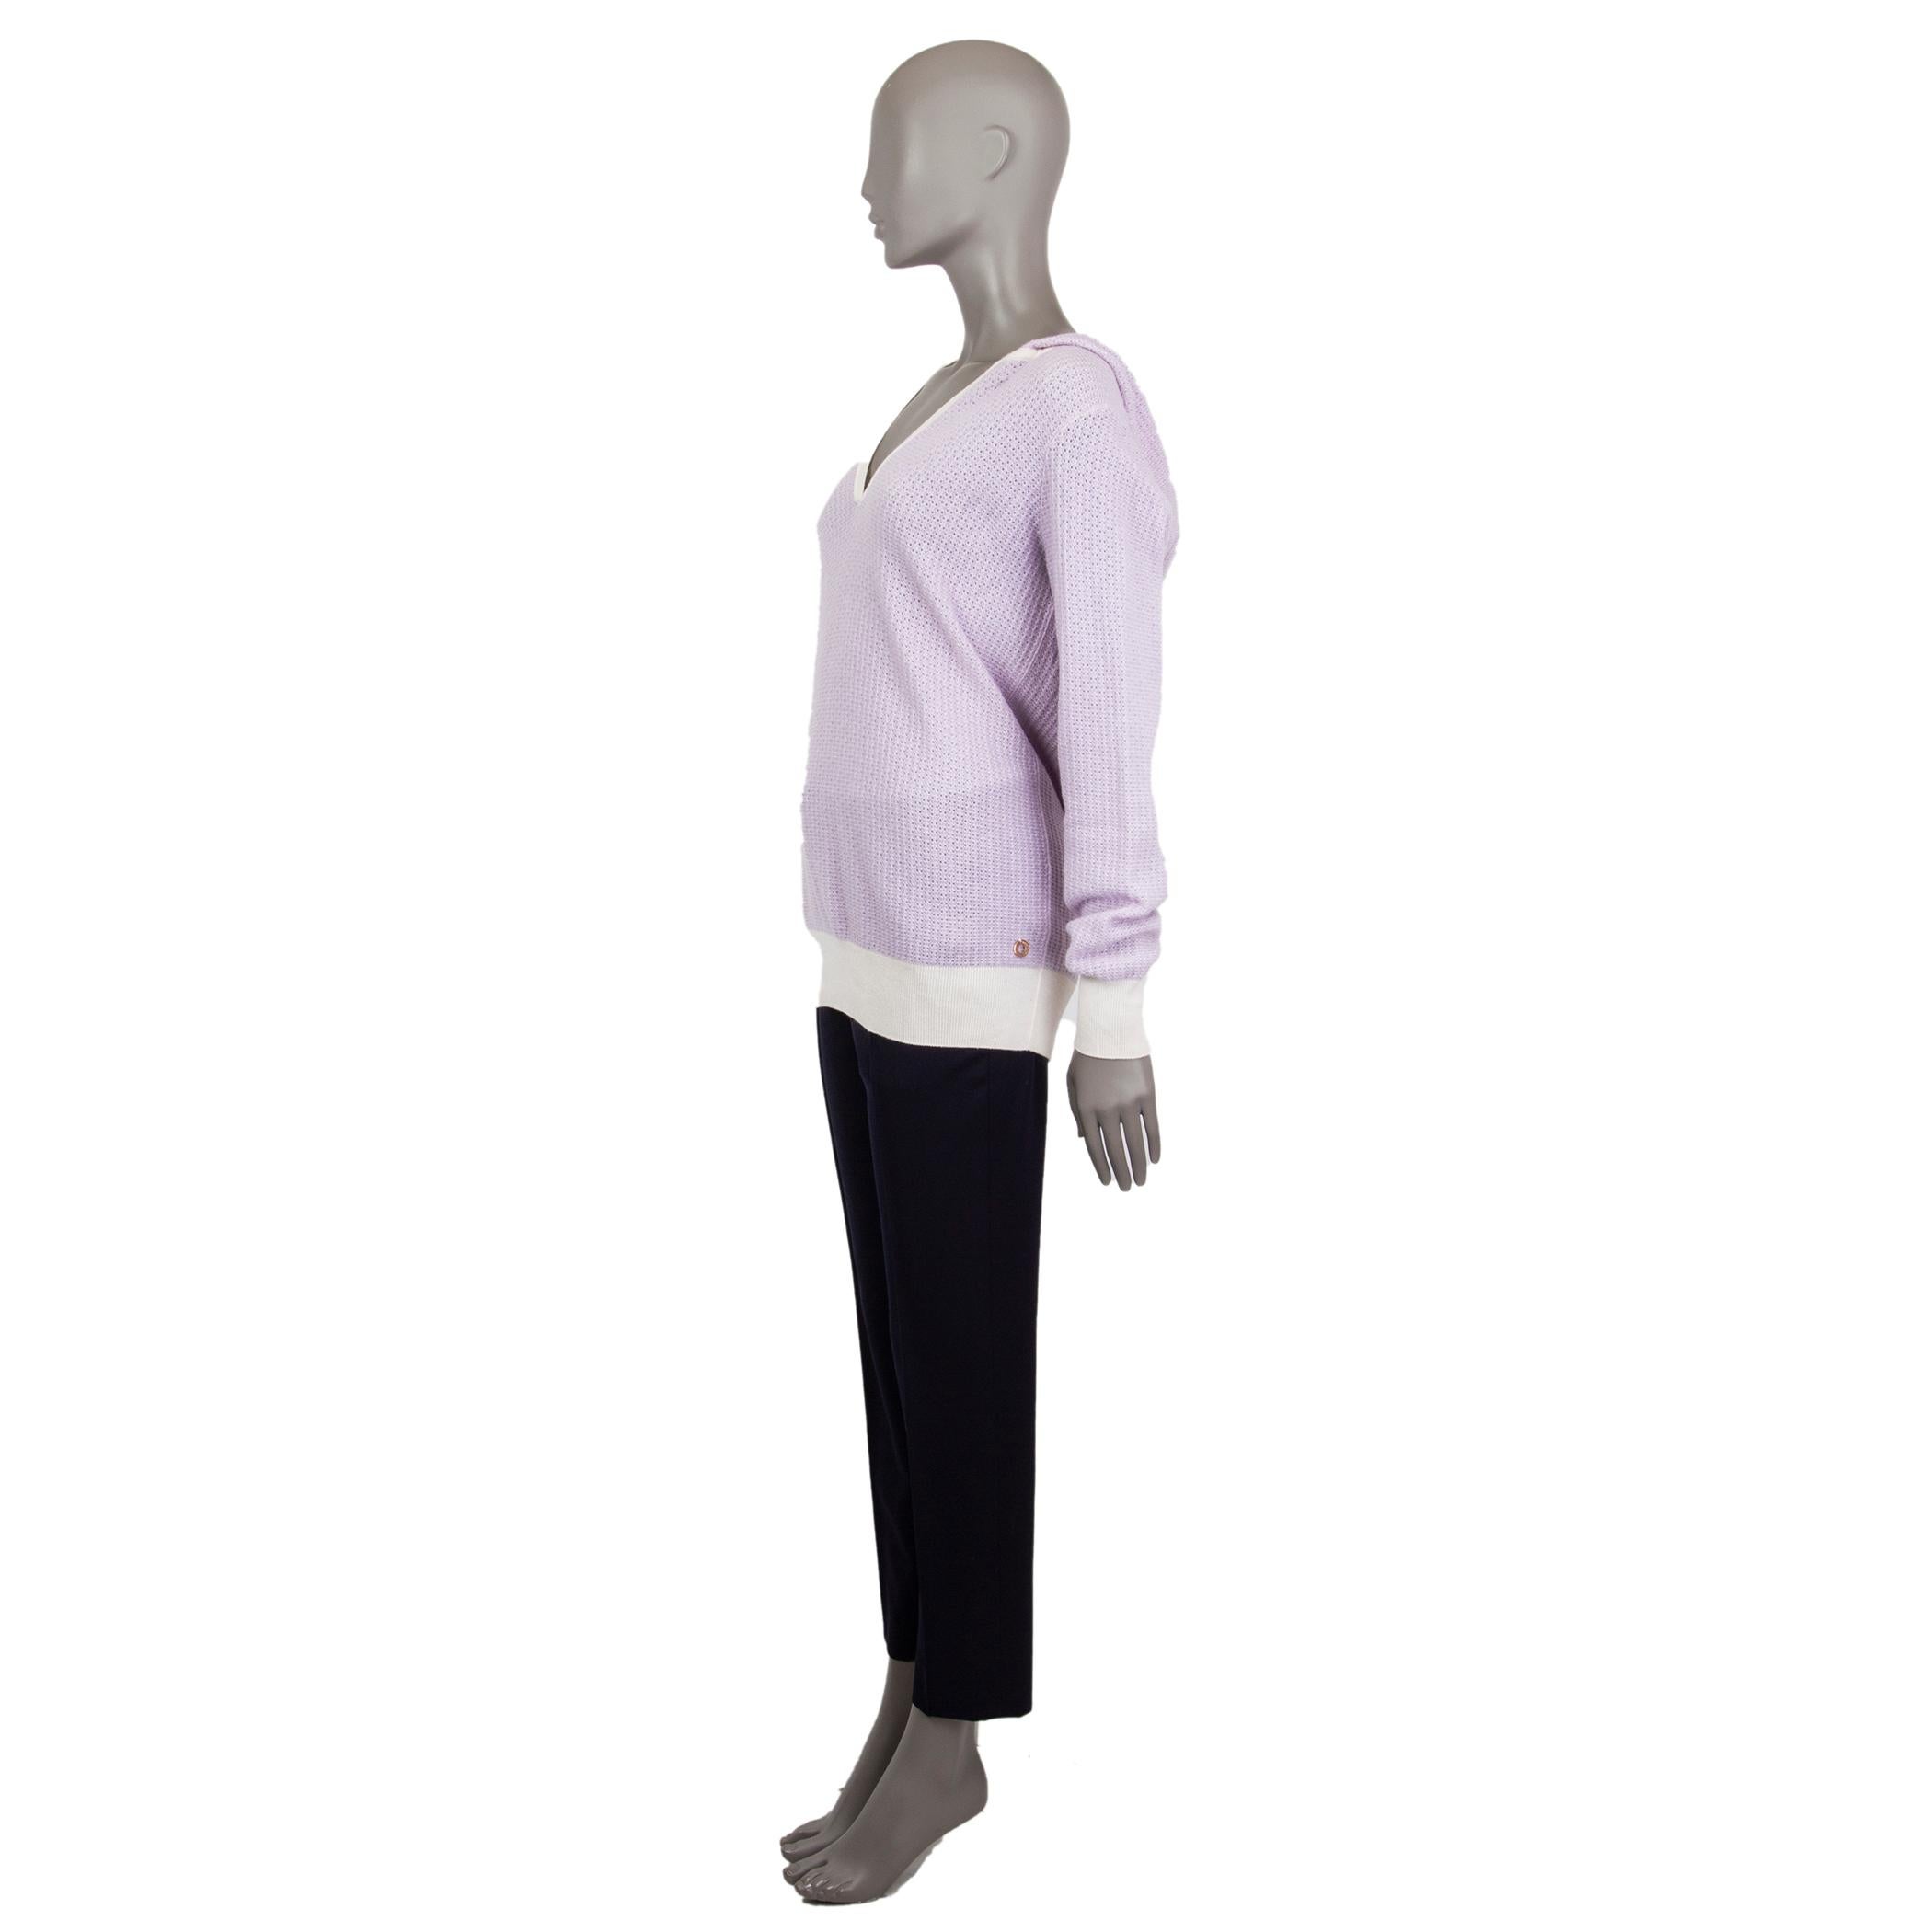 Loro Piana long-sleeve hooded sweater in lilac and off-white cashmere (100%) with a v-neck and elbow patches. Unlined. Has been worn and is in excellent condition. 

Tag Size 46
Size XL
Shoulder Width 46cm (17.9in)
Bust 98cm (38.2in) to 102cm